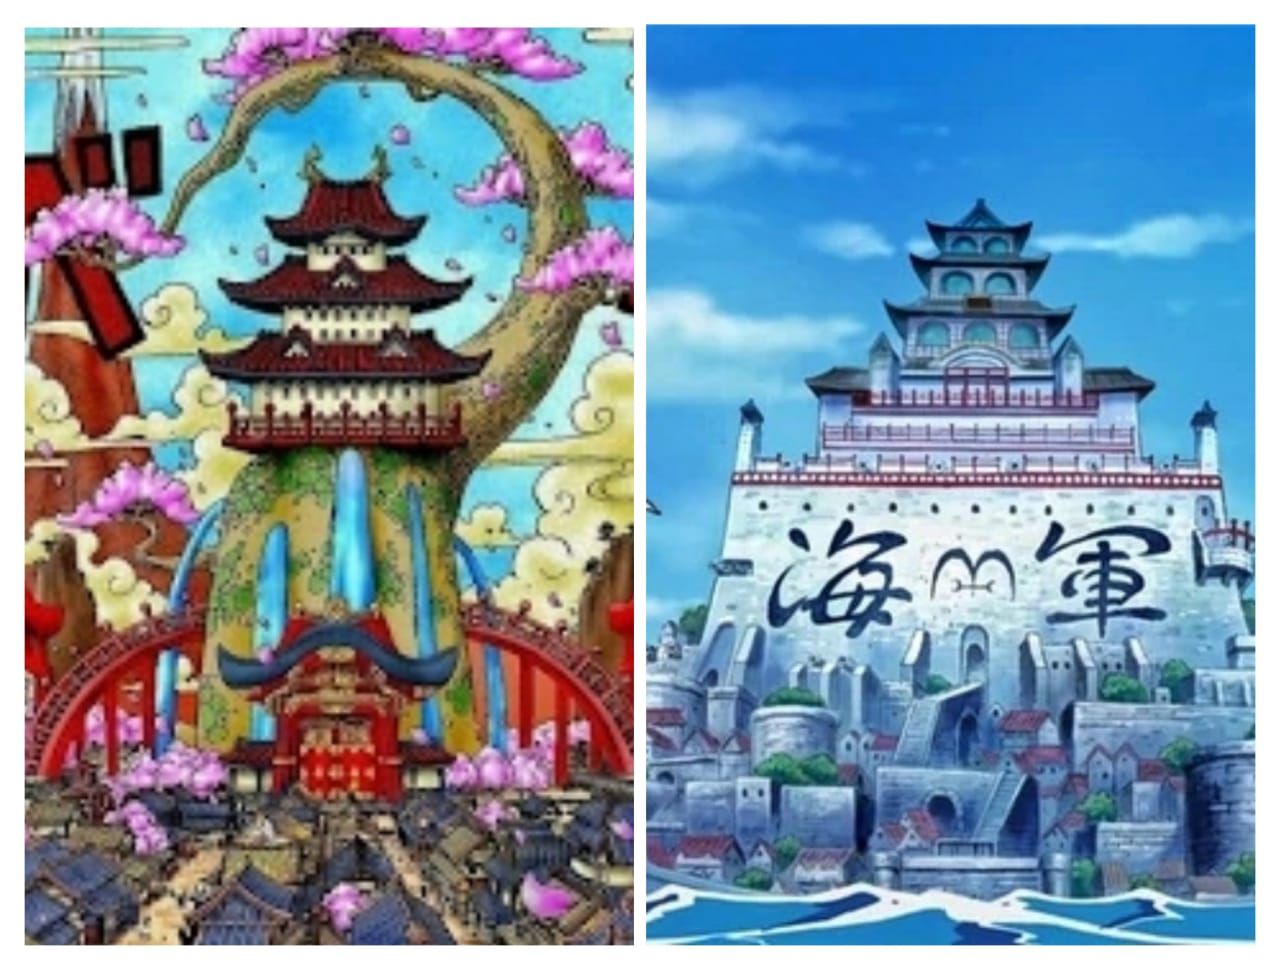 Comparing the Epicness between One Piece's Marineford and Wano Saga